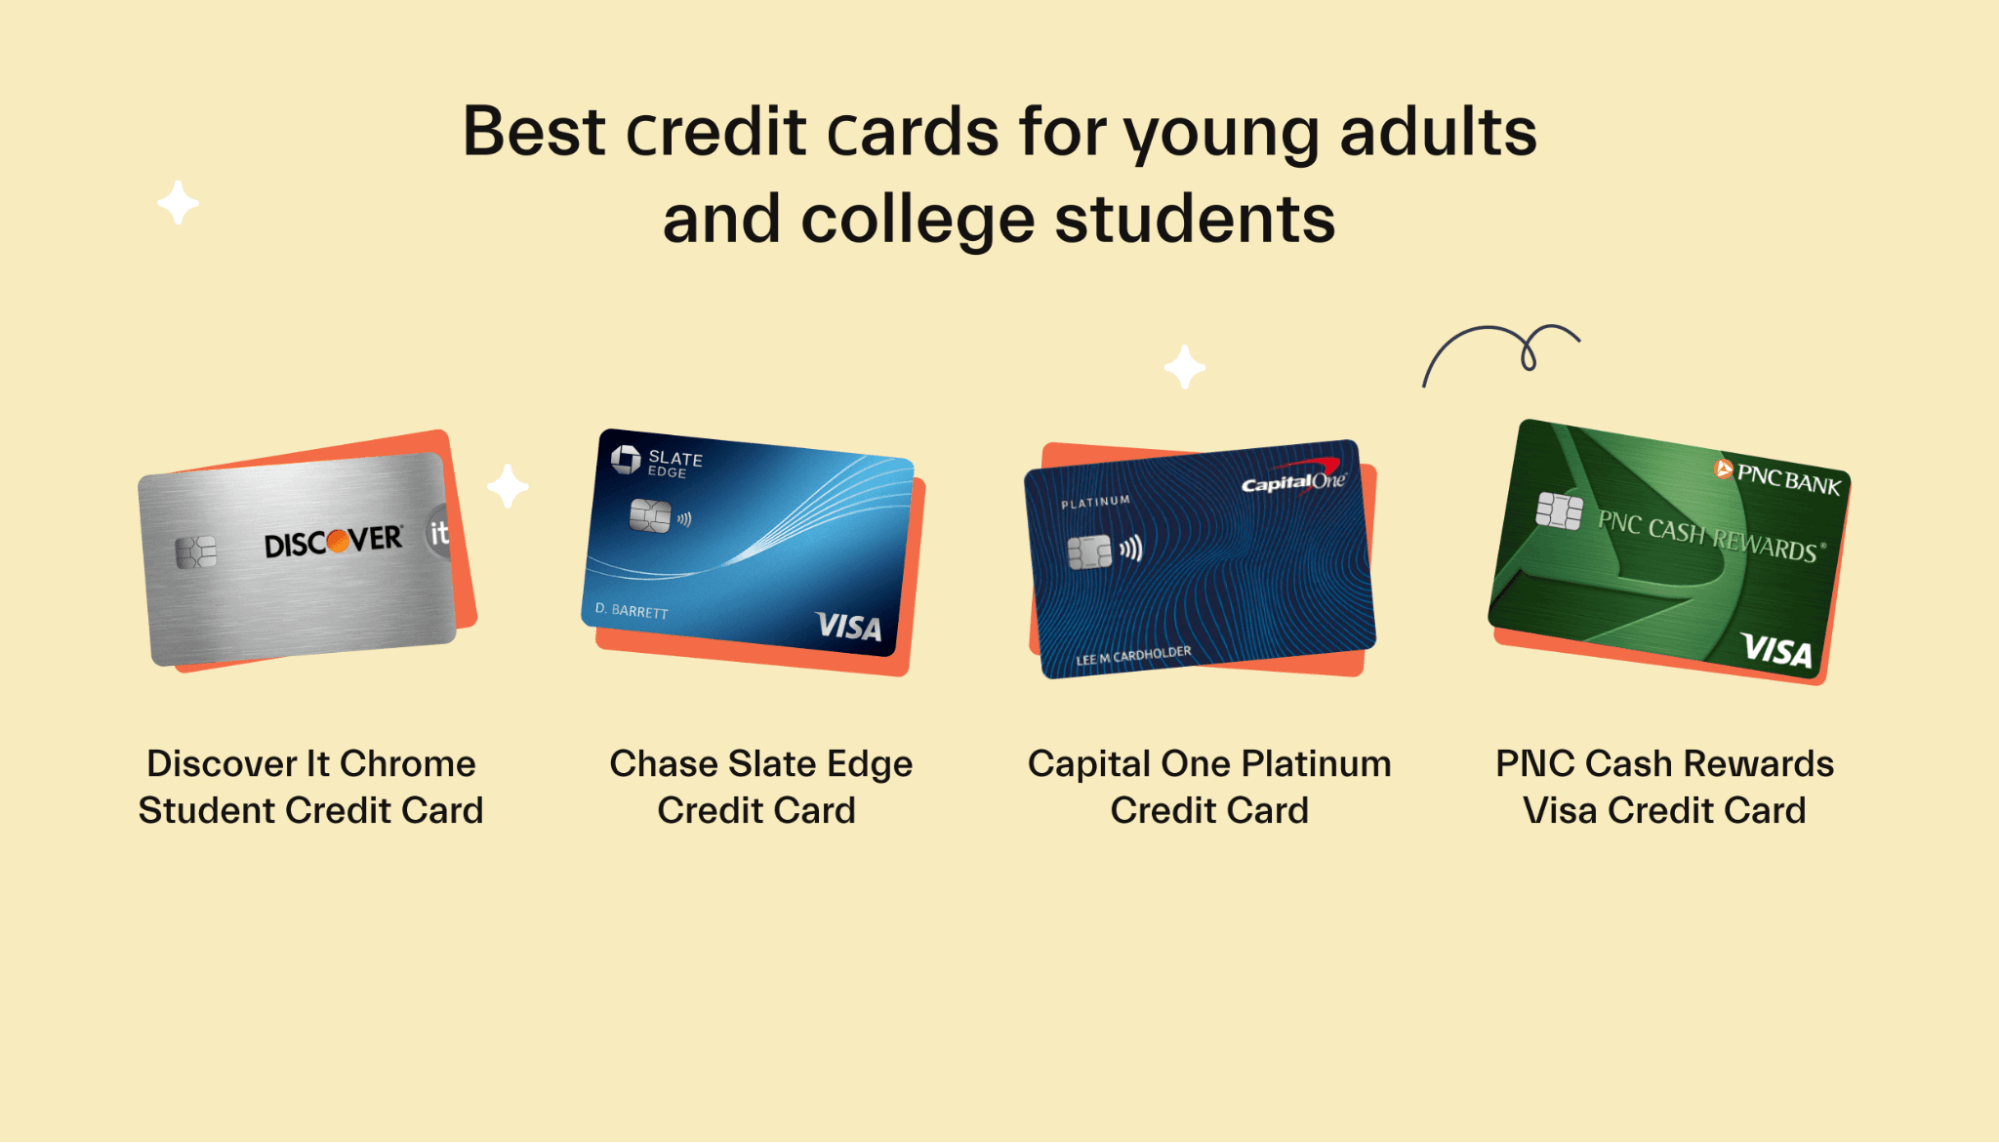 Best Credit Cards for Young Adults and College Students